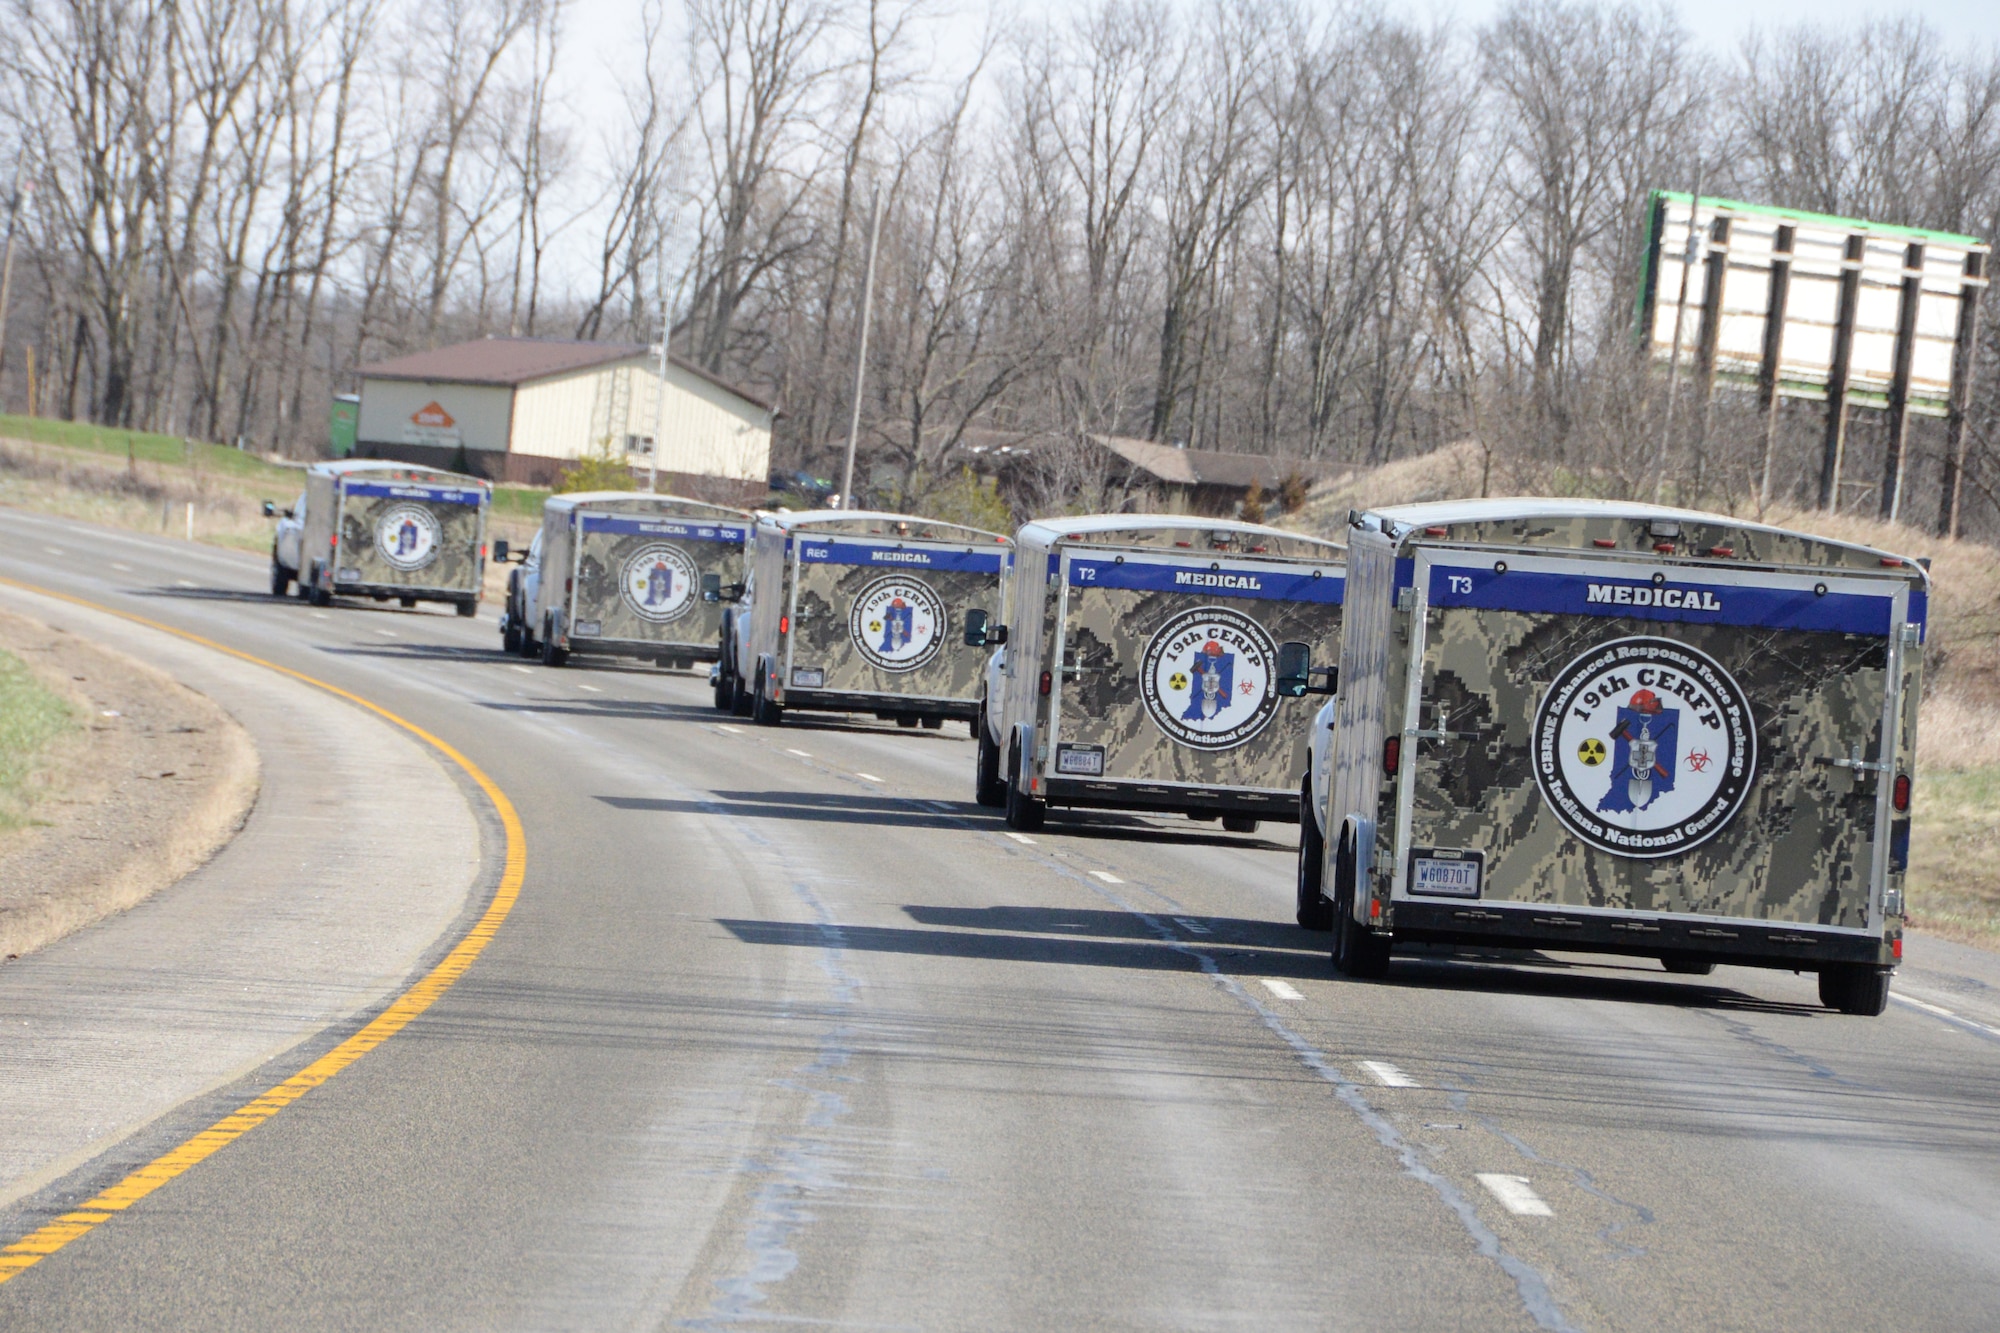 U.S. Air Force Airmen with the Indiana Air National Guard assigned to the 19th CBRNE Enhanced Response Force Package, 181st Intelligence Wing, convoy to Camp Grayling, Mich., for a cold weather training exercise, Operation Arctic Eagle, April 3, 2016. (U.S. Air National Guard photo by Airman 1st Class Kevin D. Schulze)